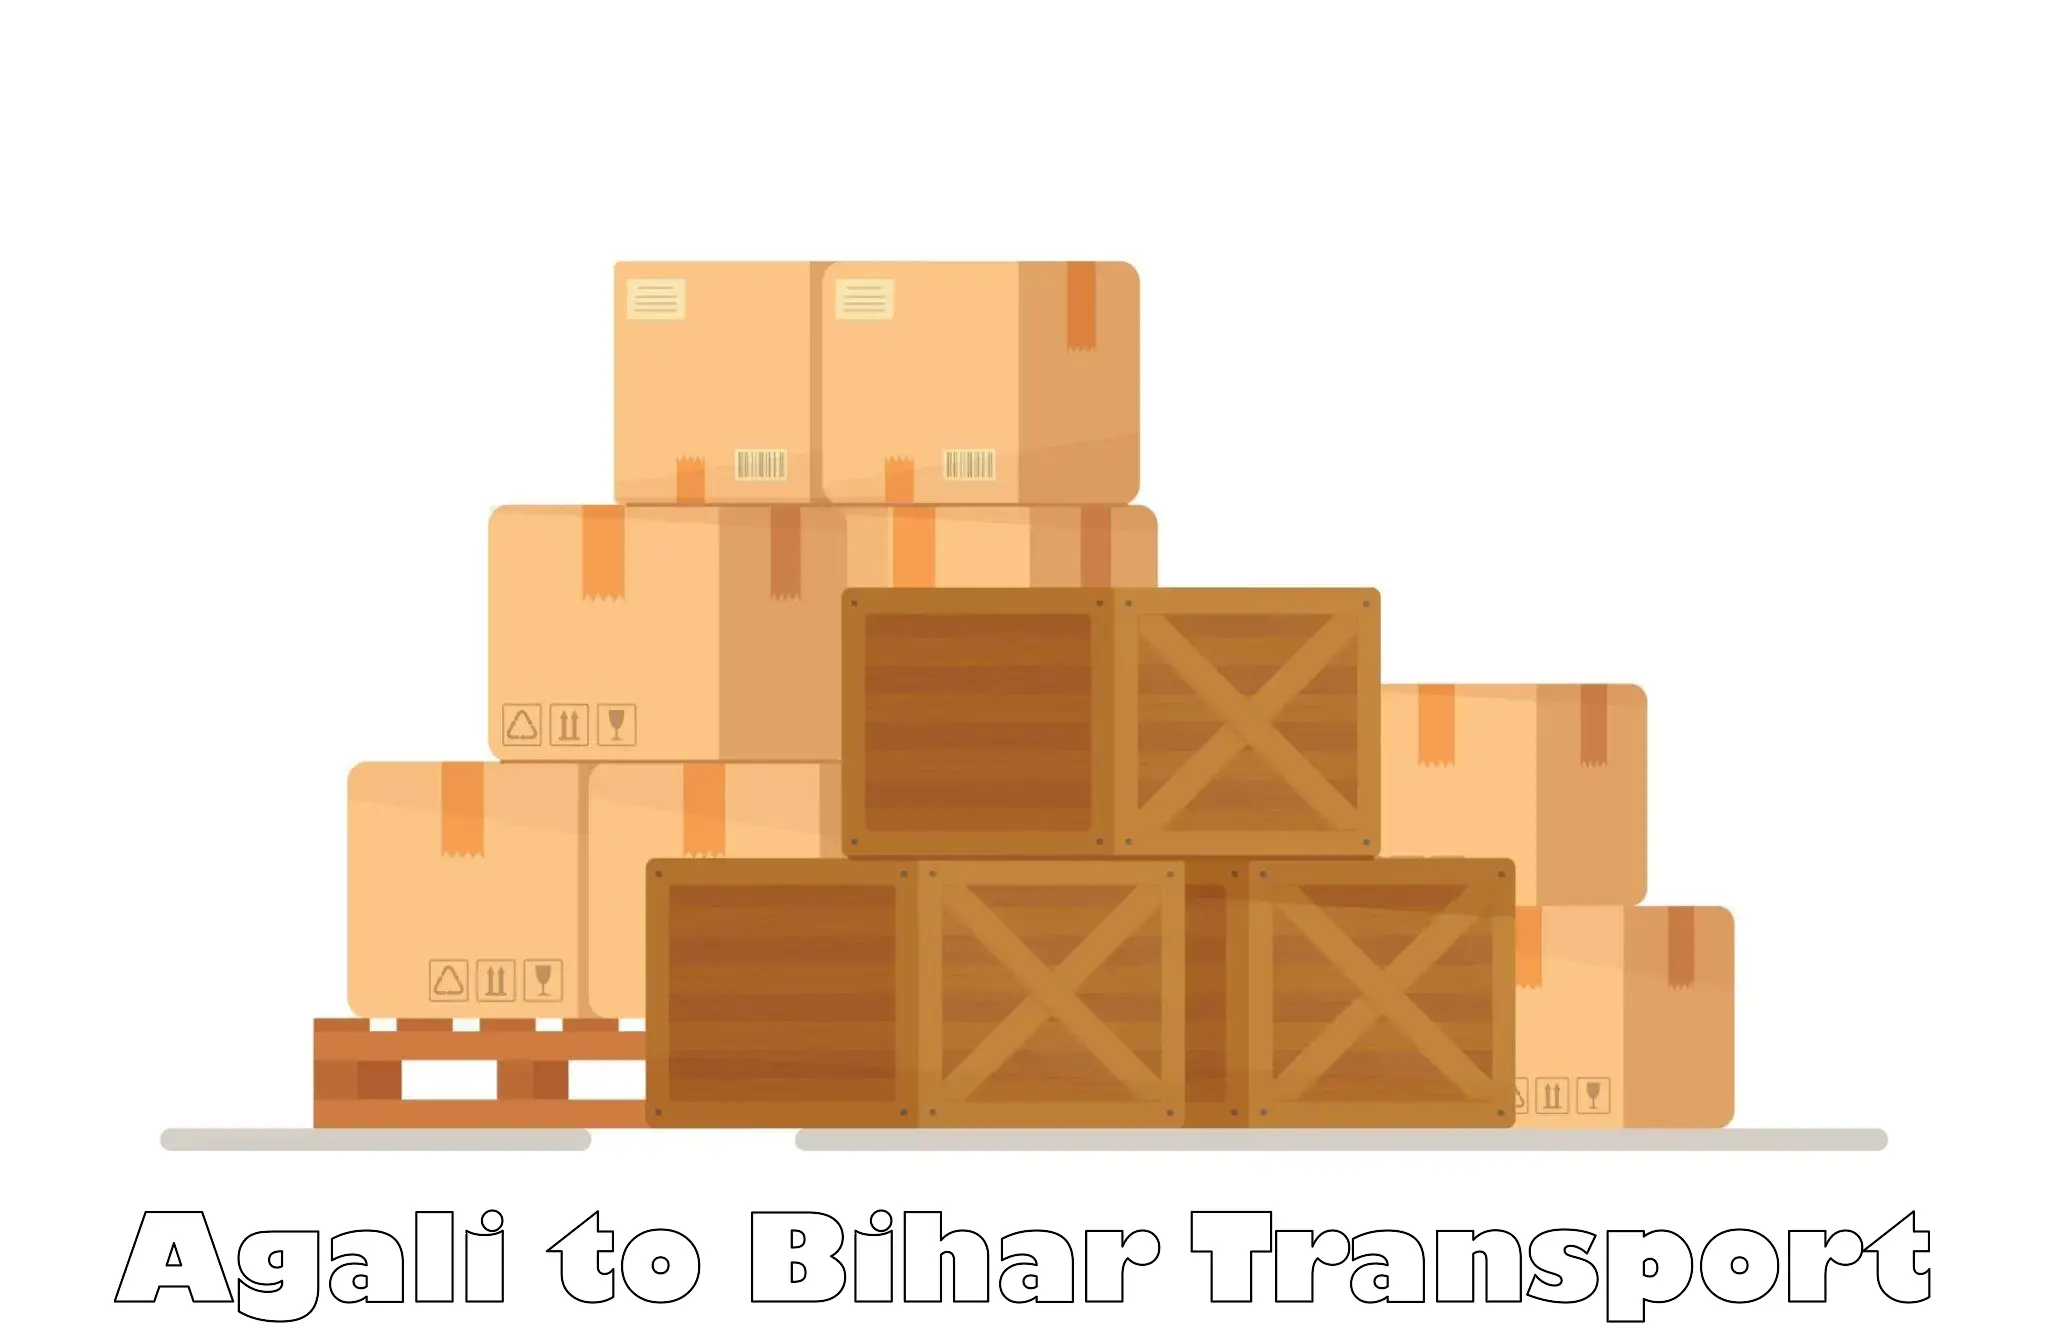 Delivery service Agali to Biraul